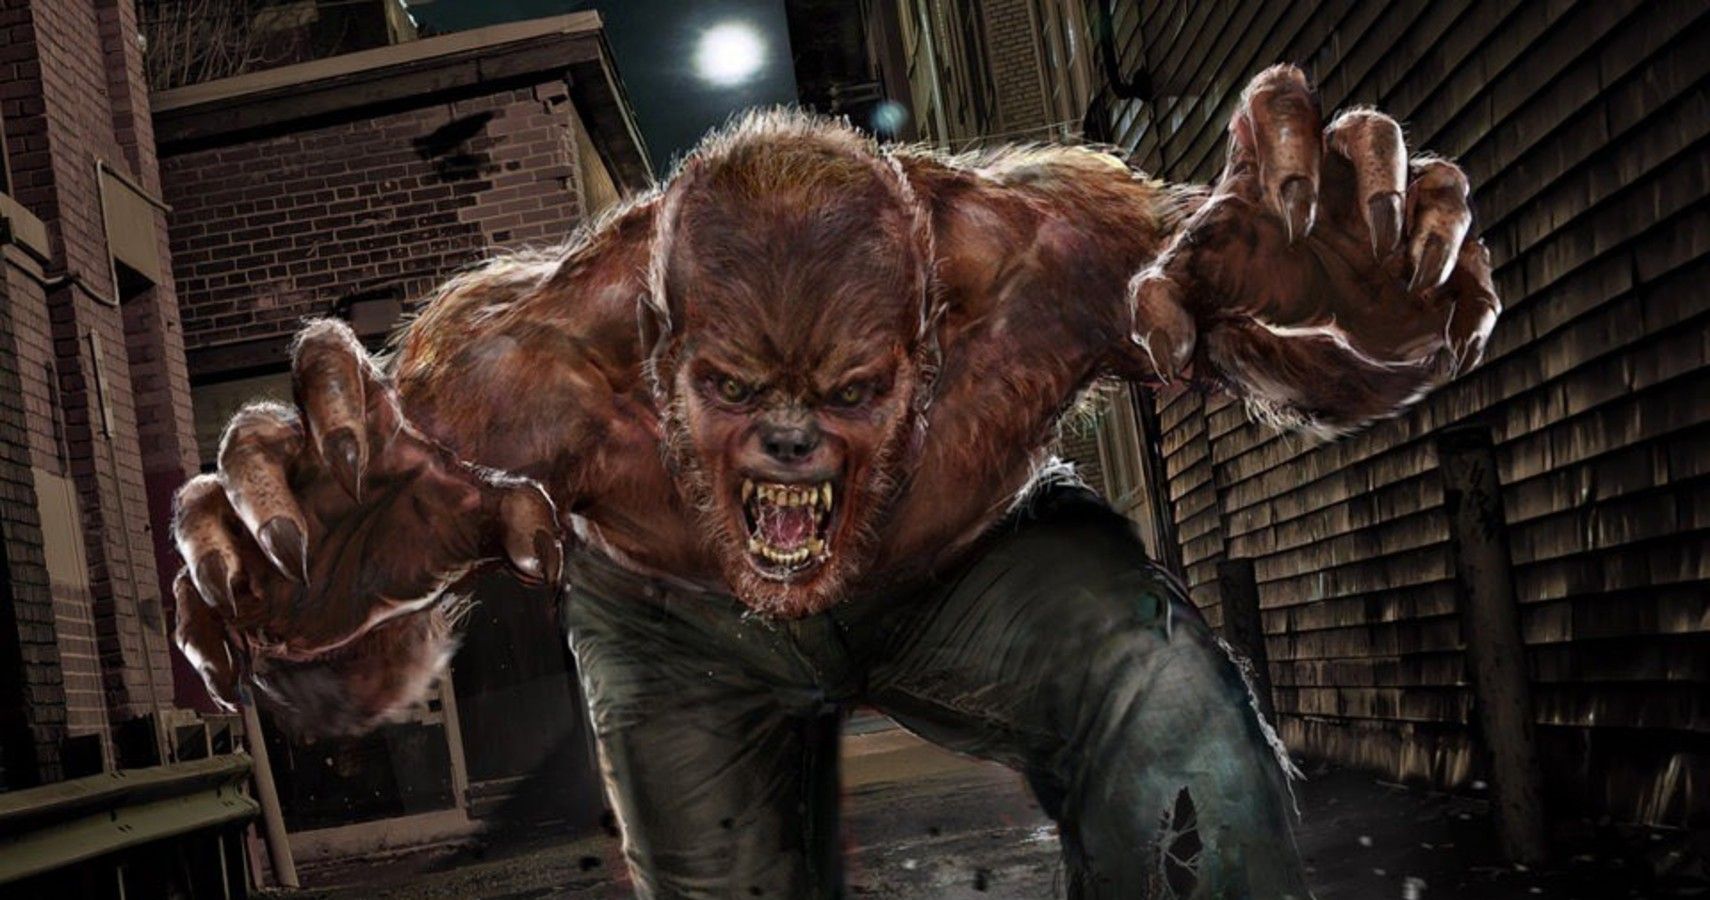 Who is the Werewolf by Night? The origin story of Marvel's lycanthrope